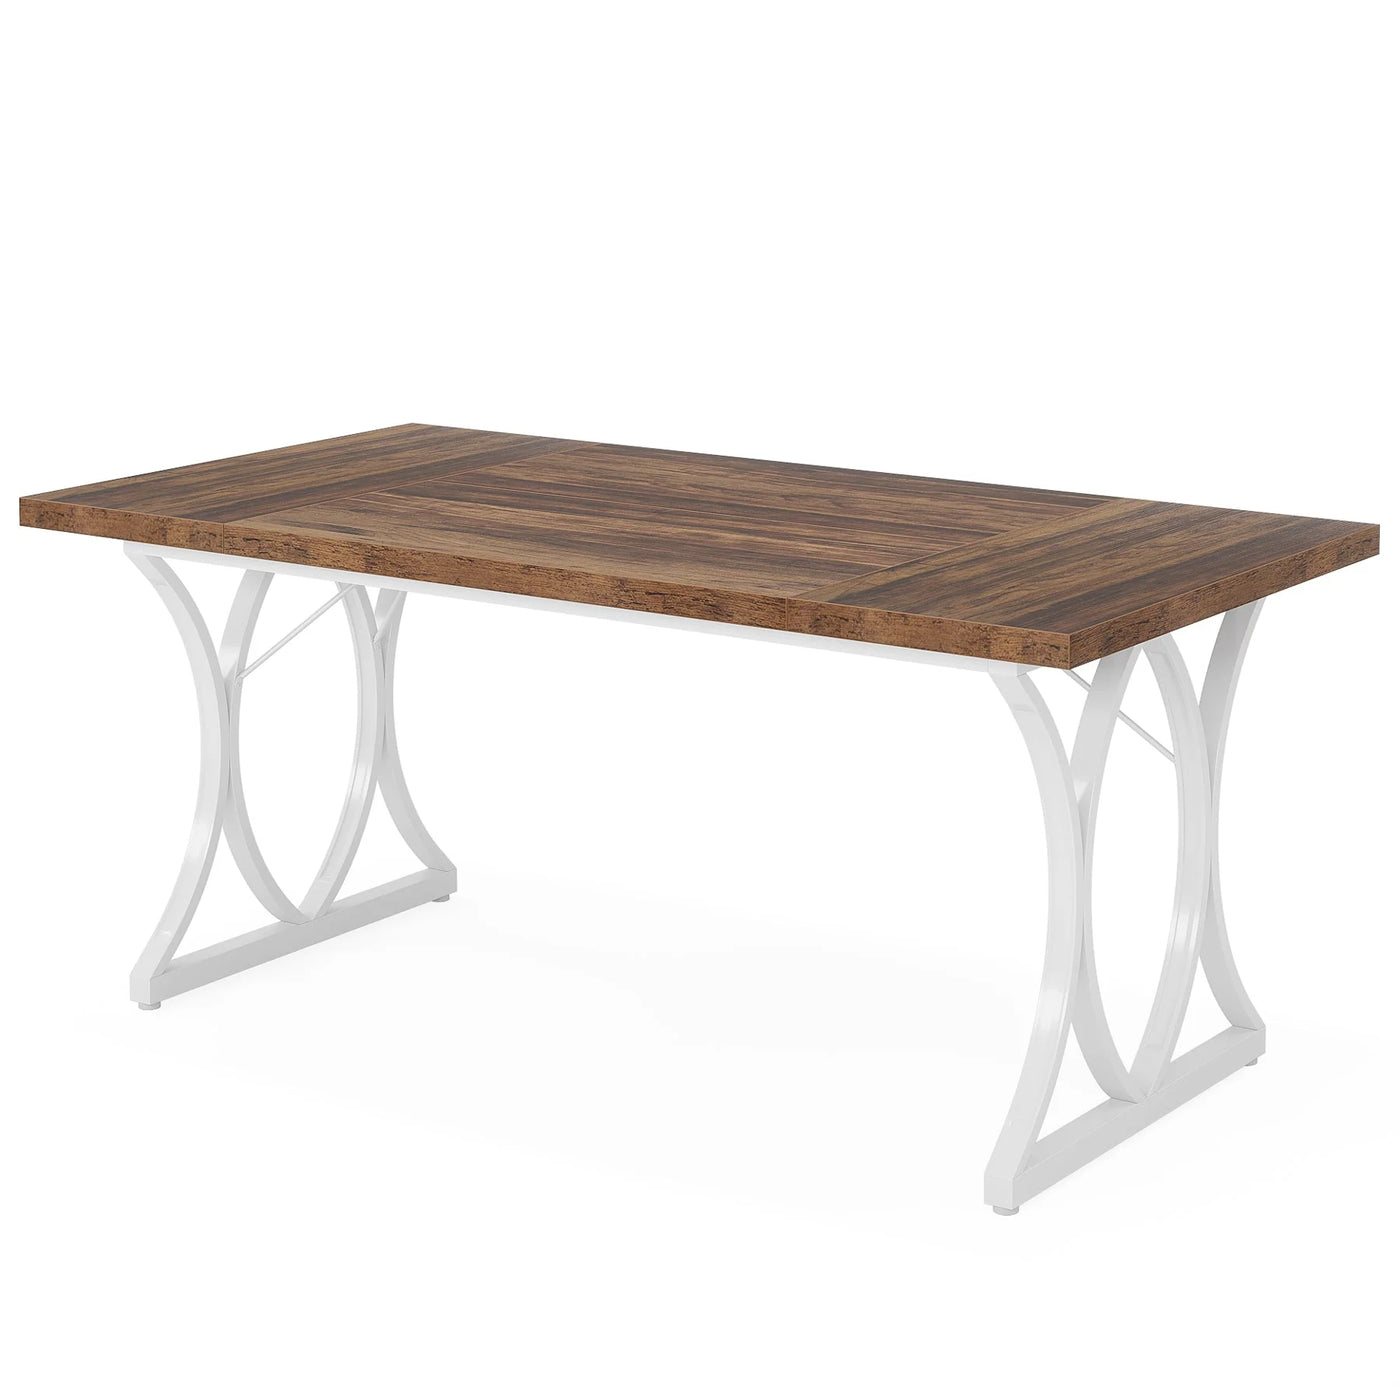 Chevre Modern Dining Table | Rectangle Wood Marble Industrial Kitchen Table Dinner Table for 6 People